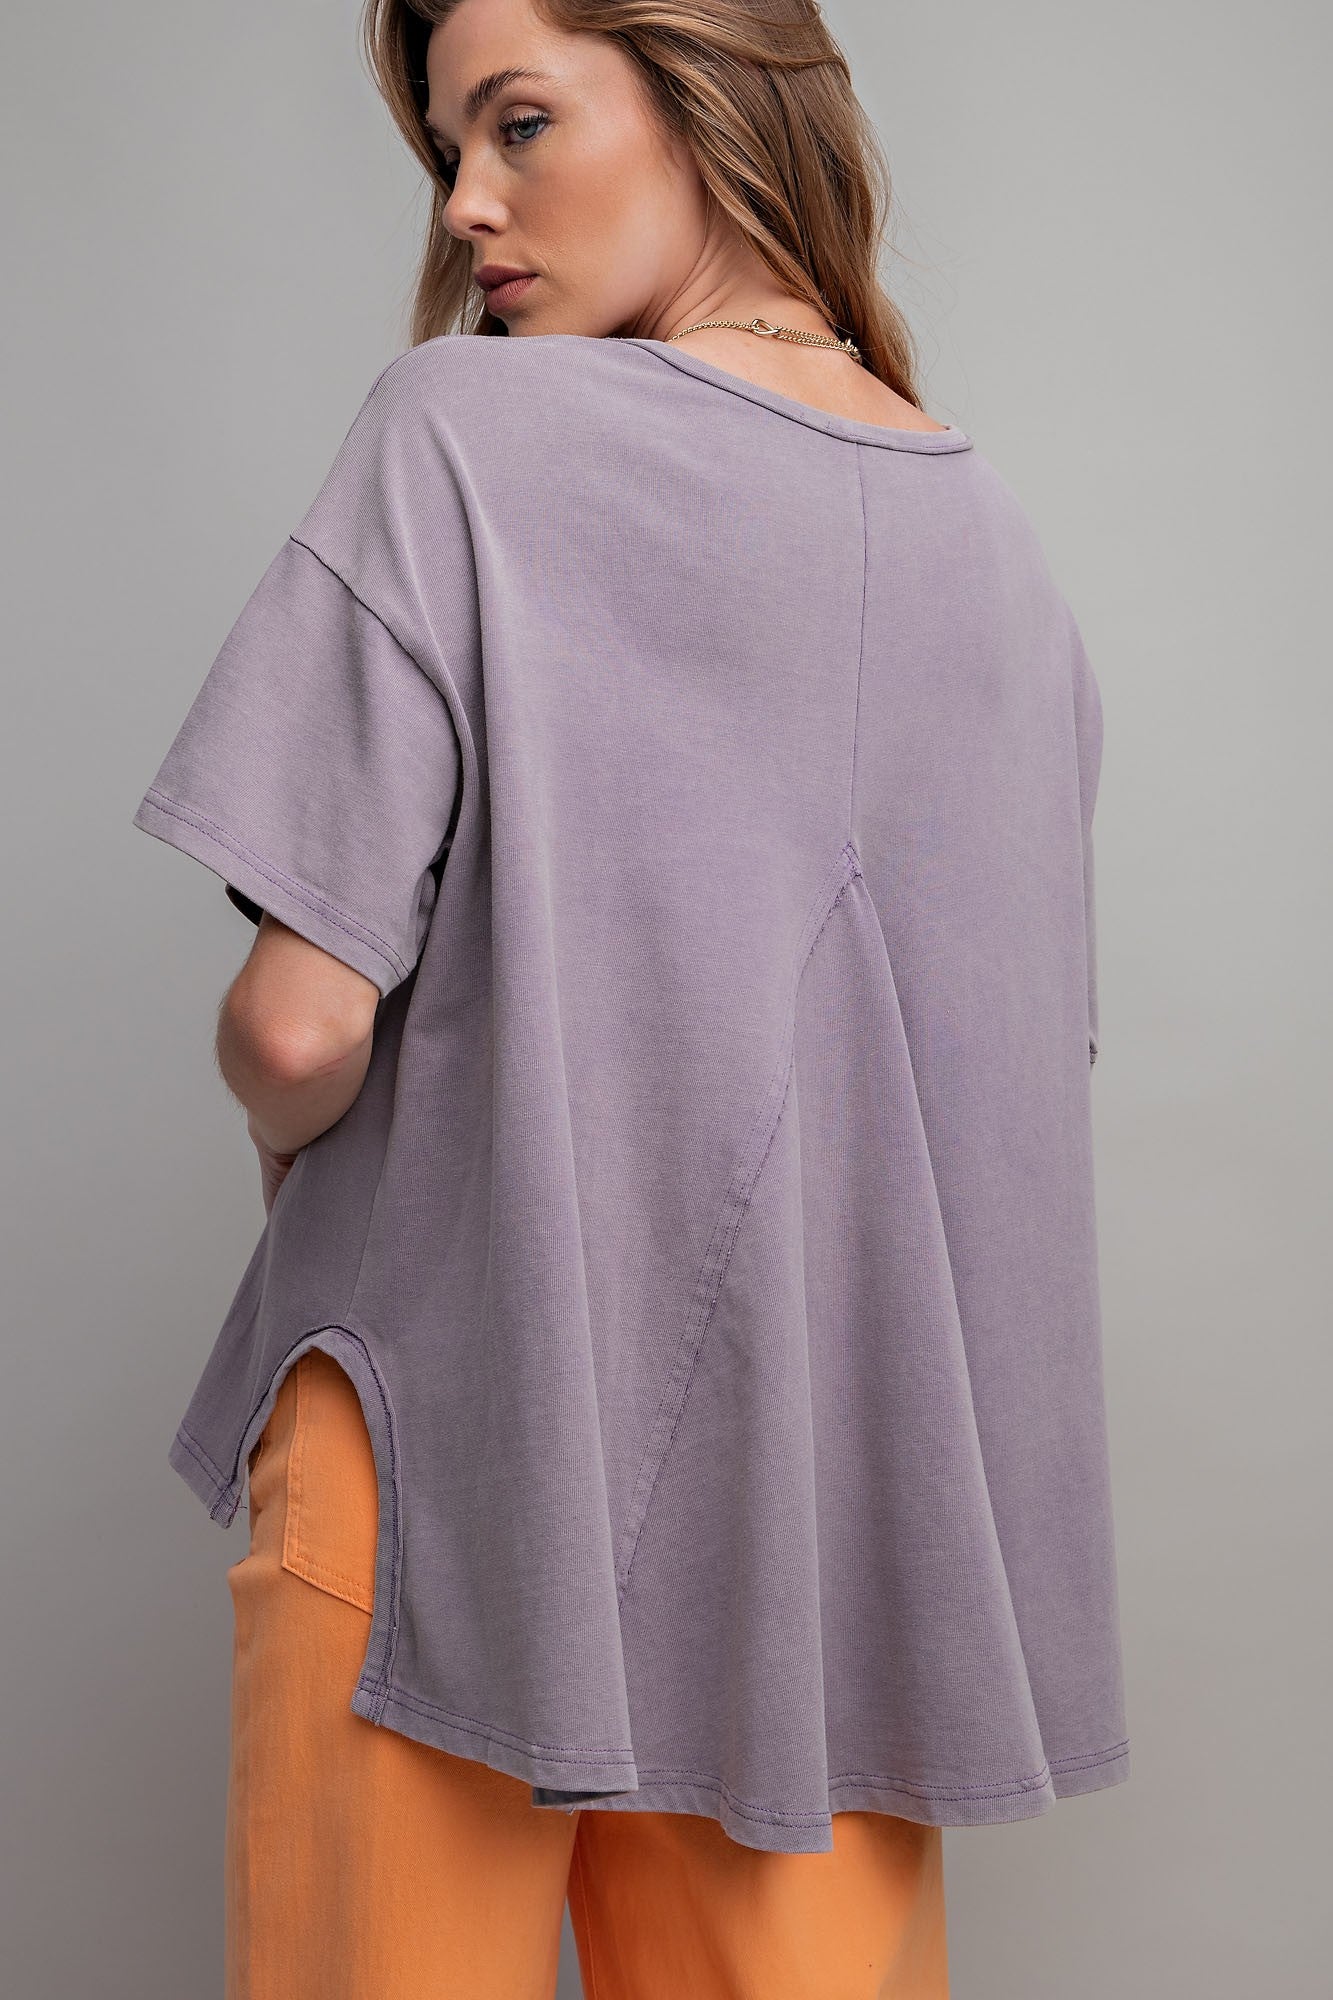 Easel Short Sleeve Star Patch Top in Dusty Lilac – June Adel